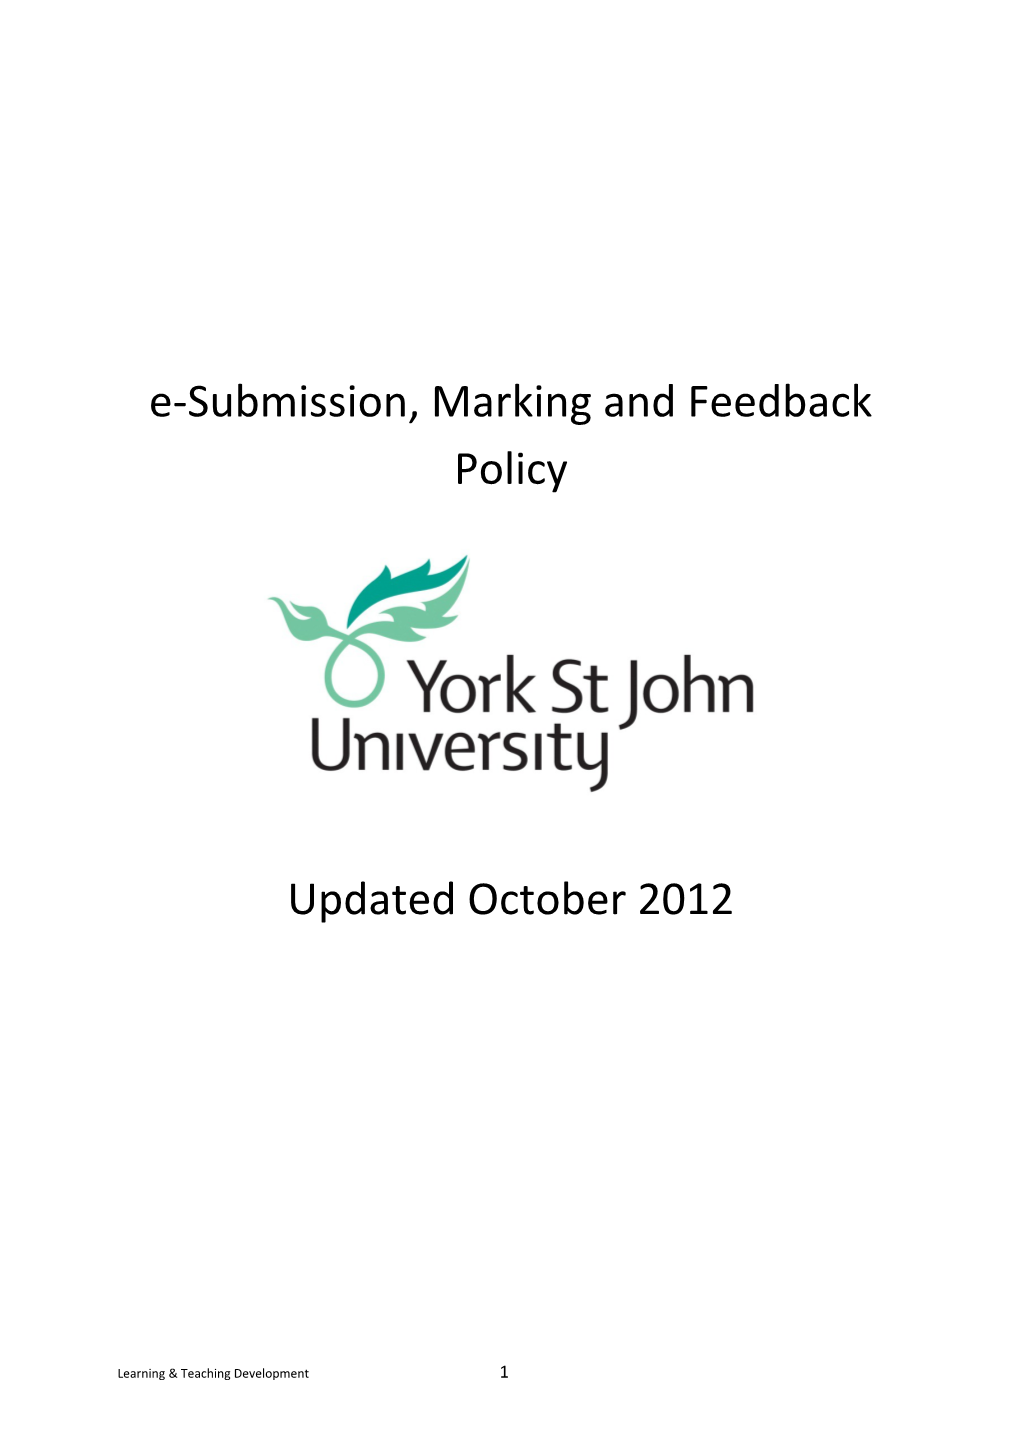 E-Submission, Marking and Feedback Policy